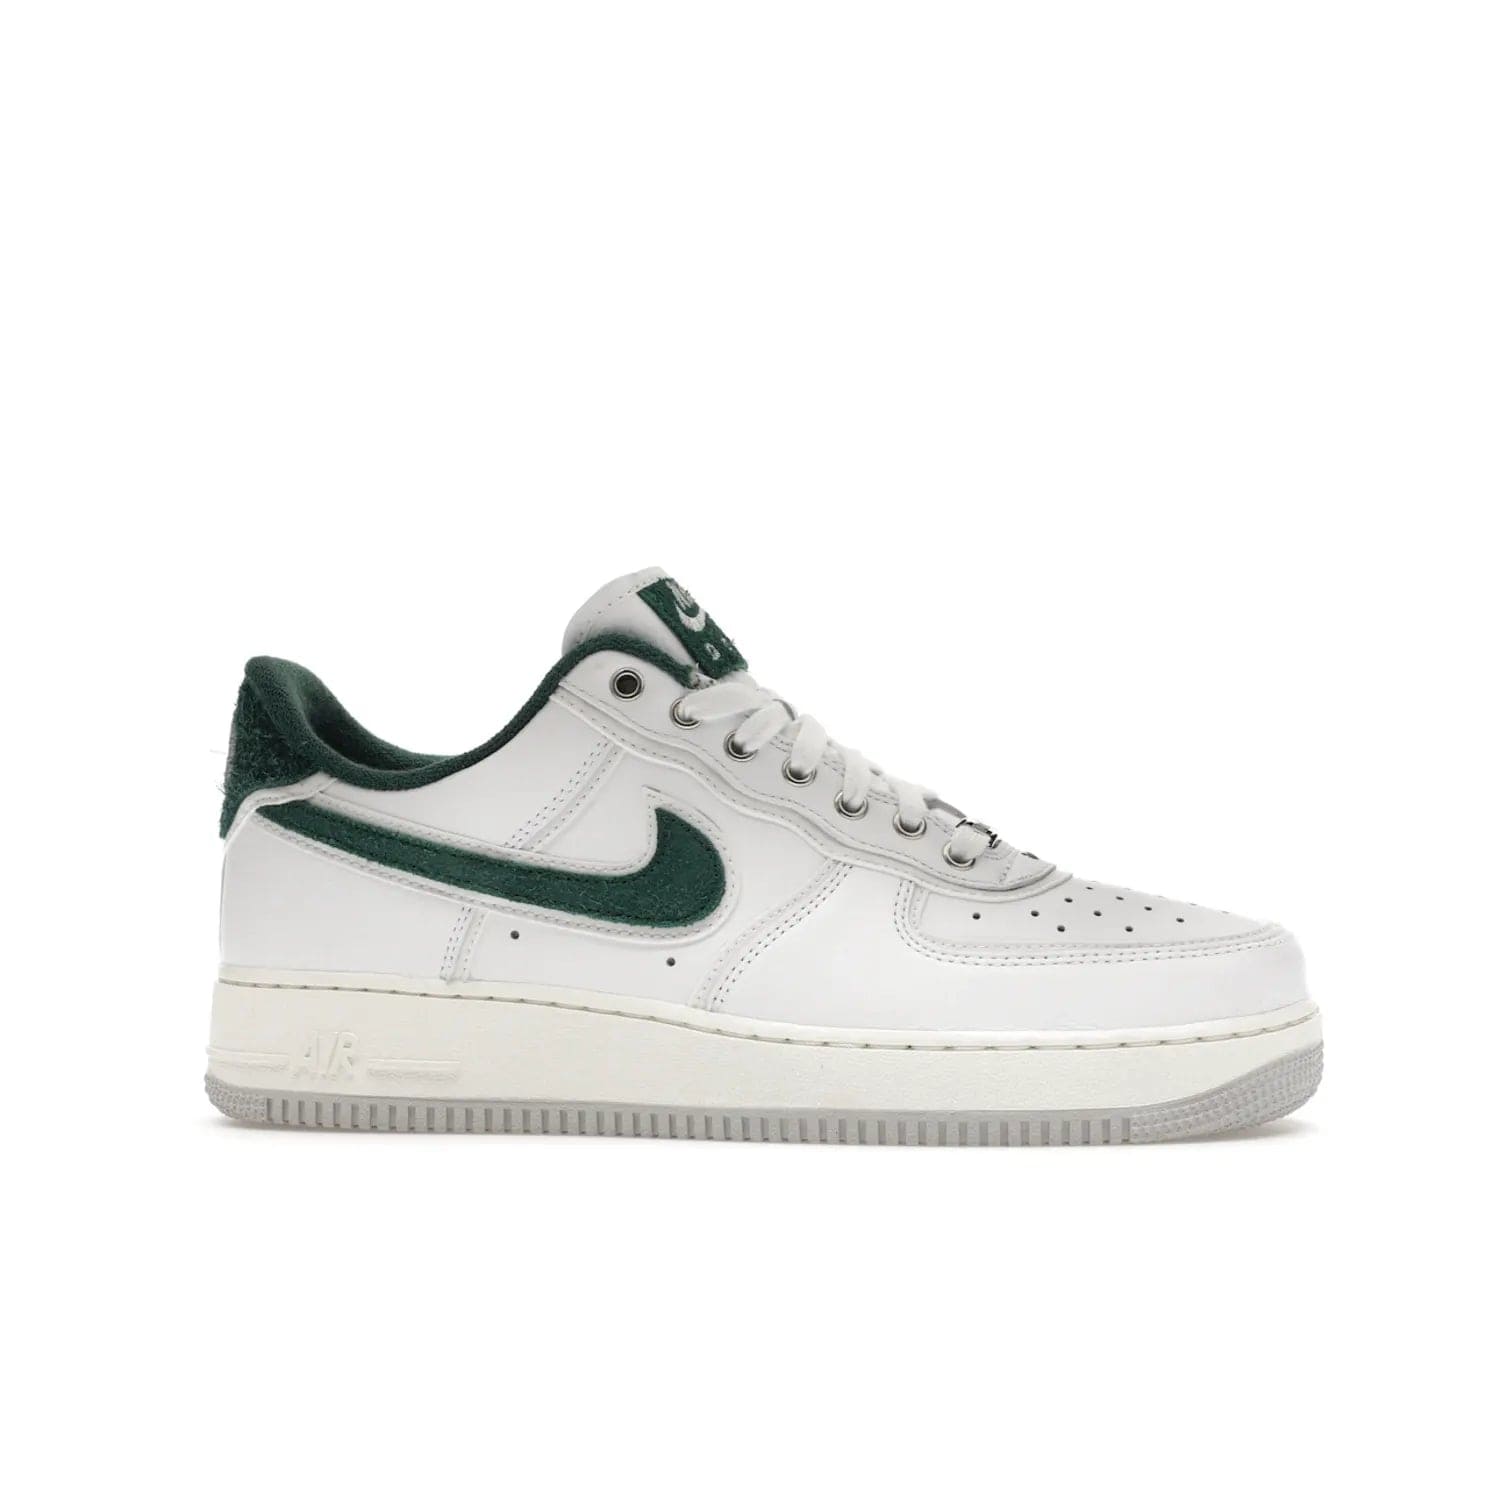 Nike Air Force 1 Low '07 Premium University of Oregon PE - Image 2 - Only at www.BallersClubKickz.com - The Nike Air Force 1 Low '07 Premium. Special Oregon University colorway. White base with green and sail accents. Cushioned rubber midsole. Comfort and style. Support your school!